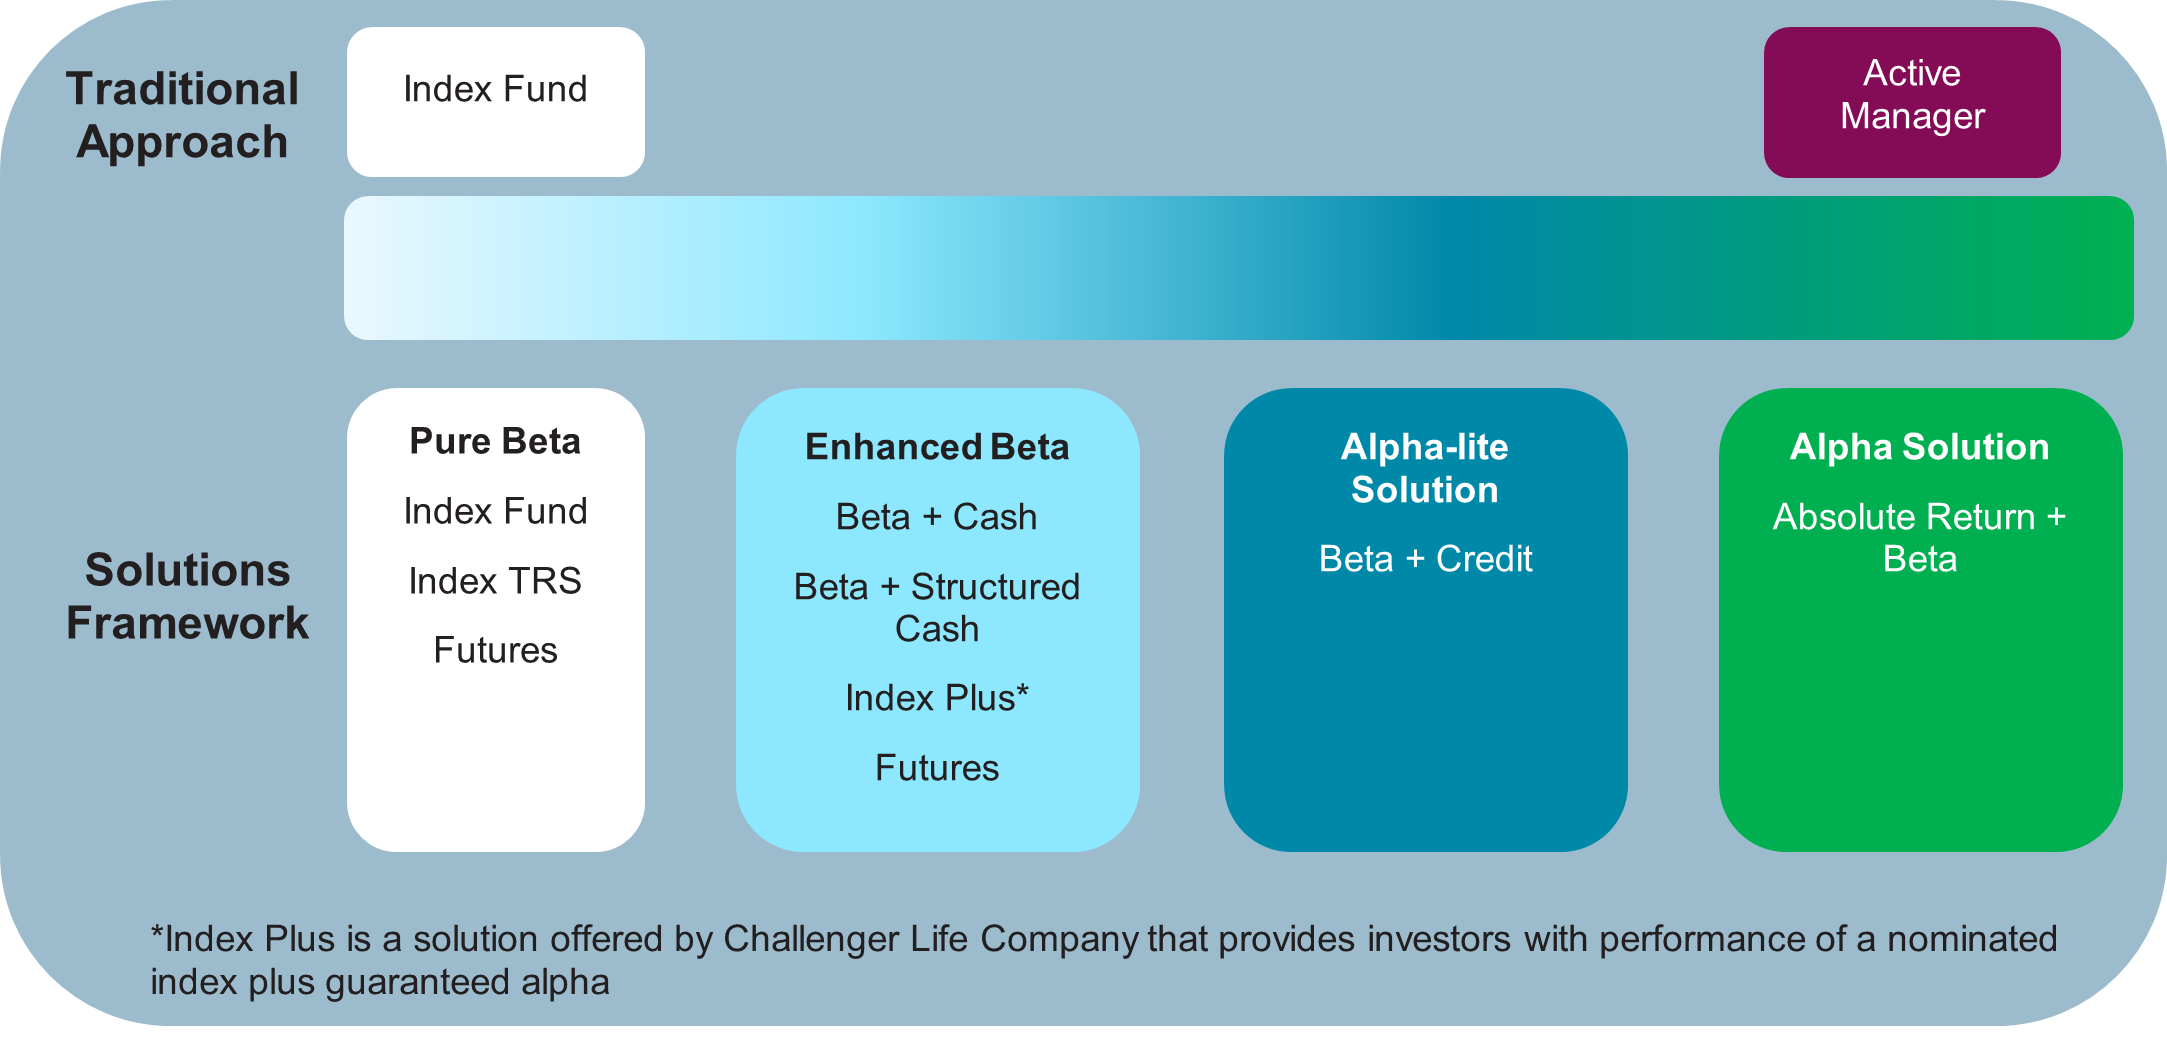 Examples of the spectrum of investment solutions